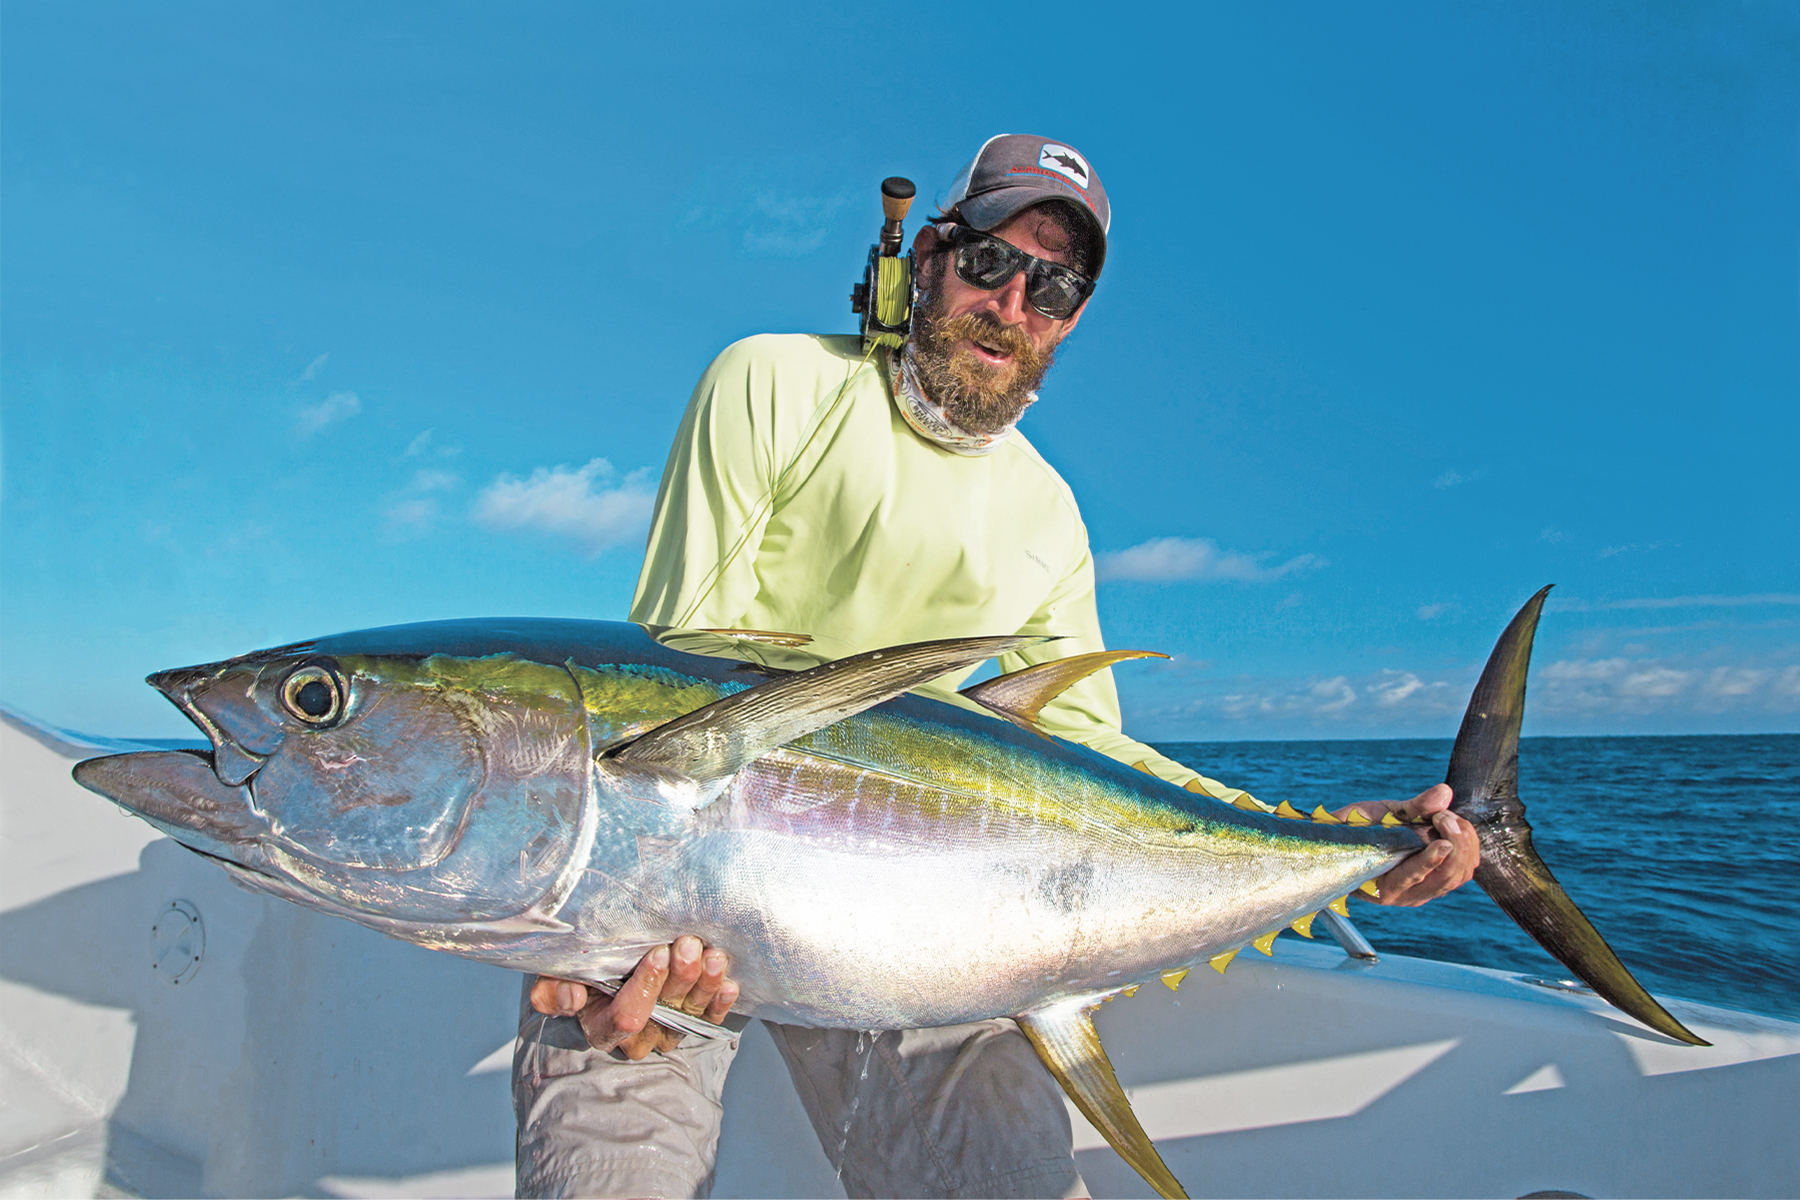 Fly Fishing Yellowfin Tuna - The Catch, Facts, Flies, Rods & More